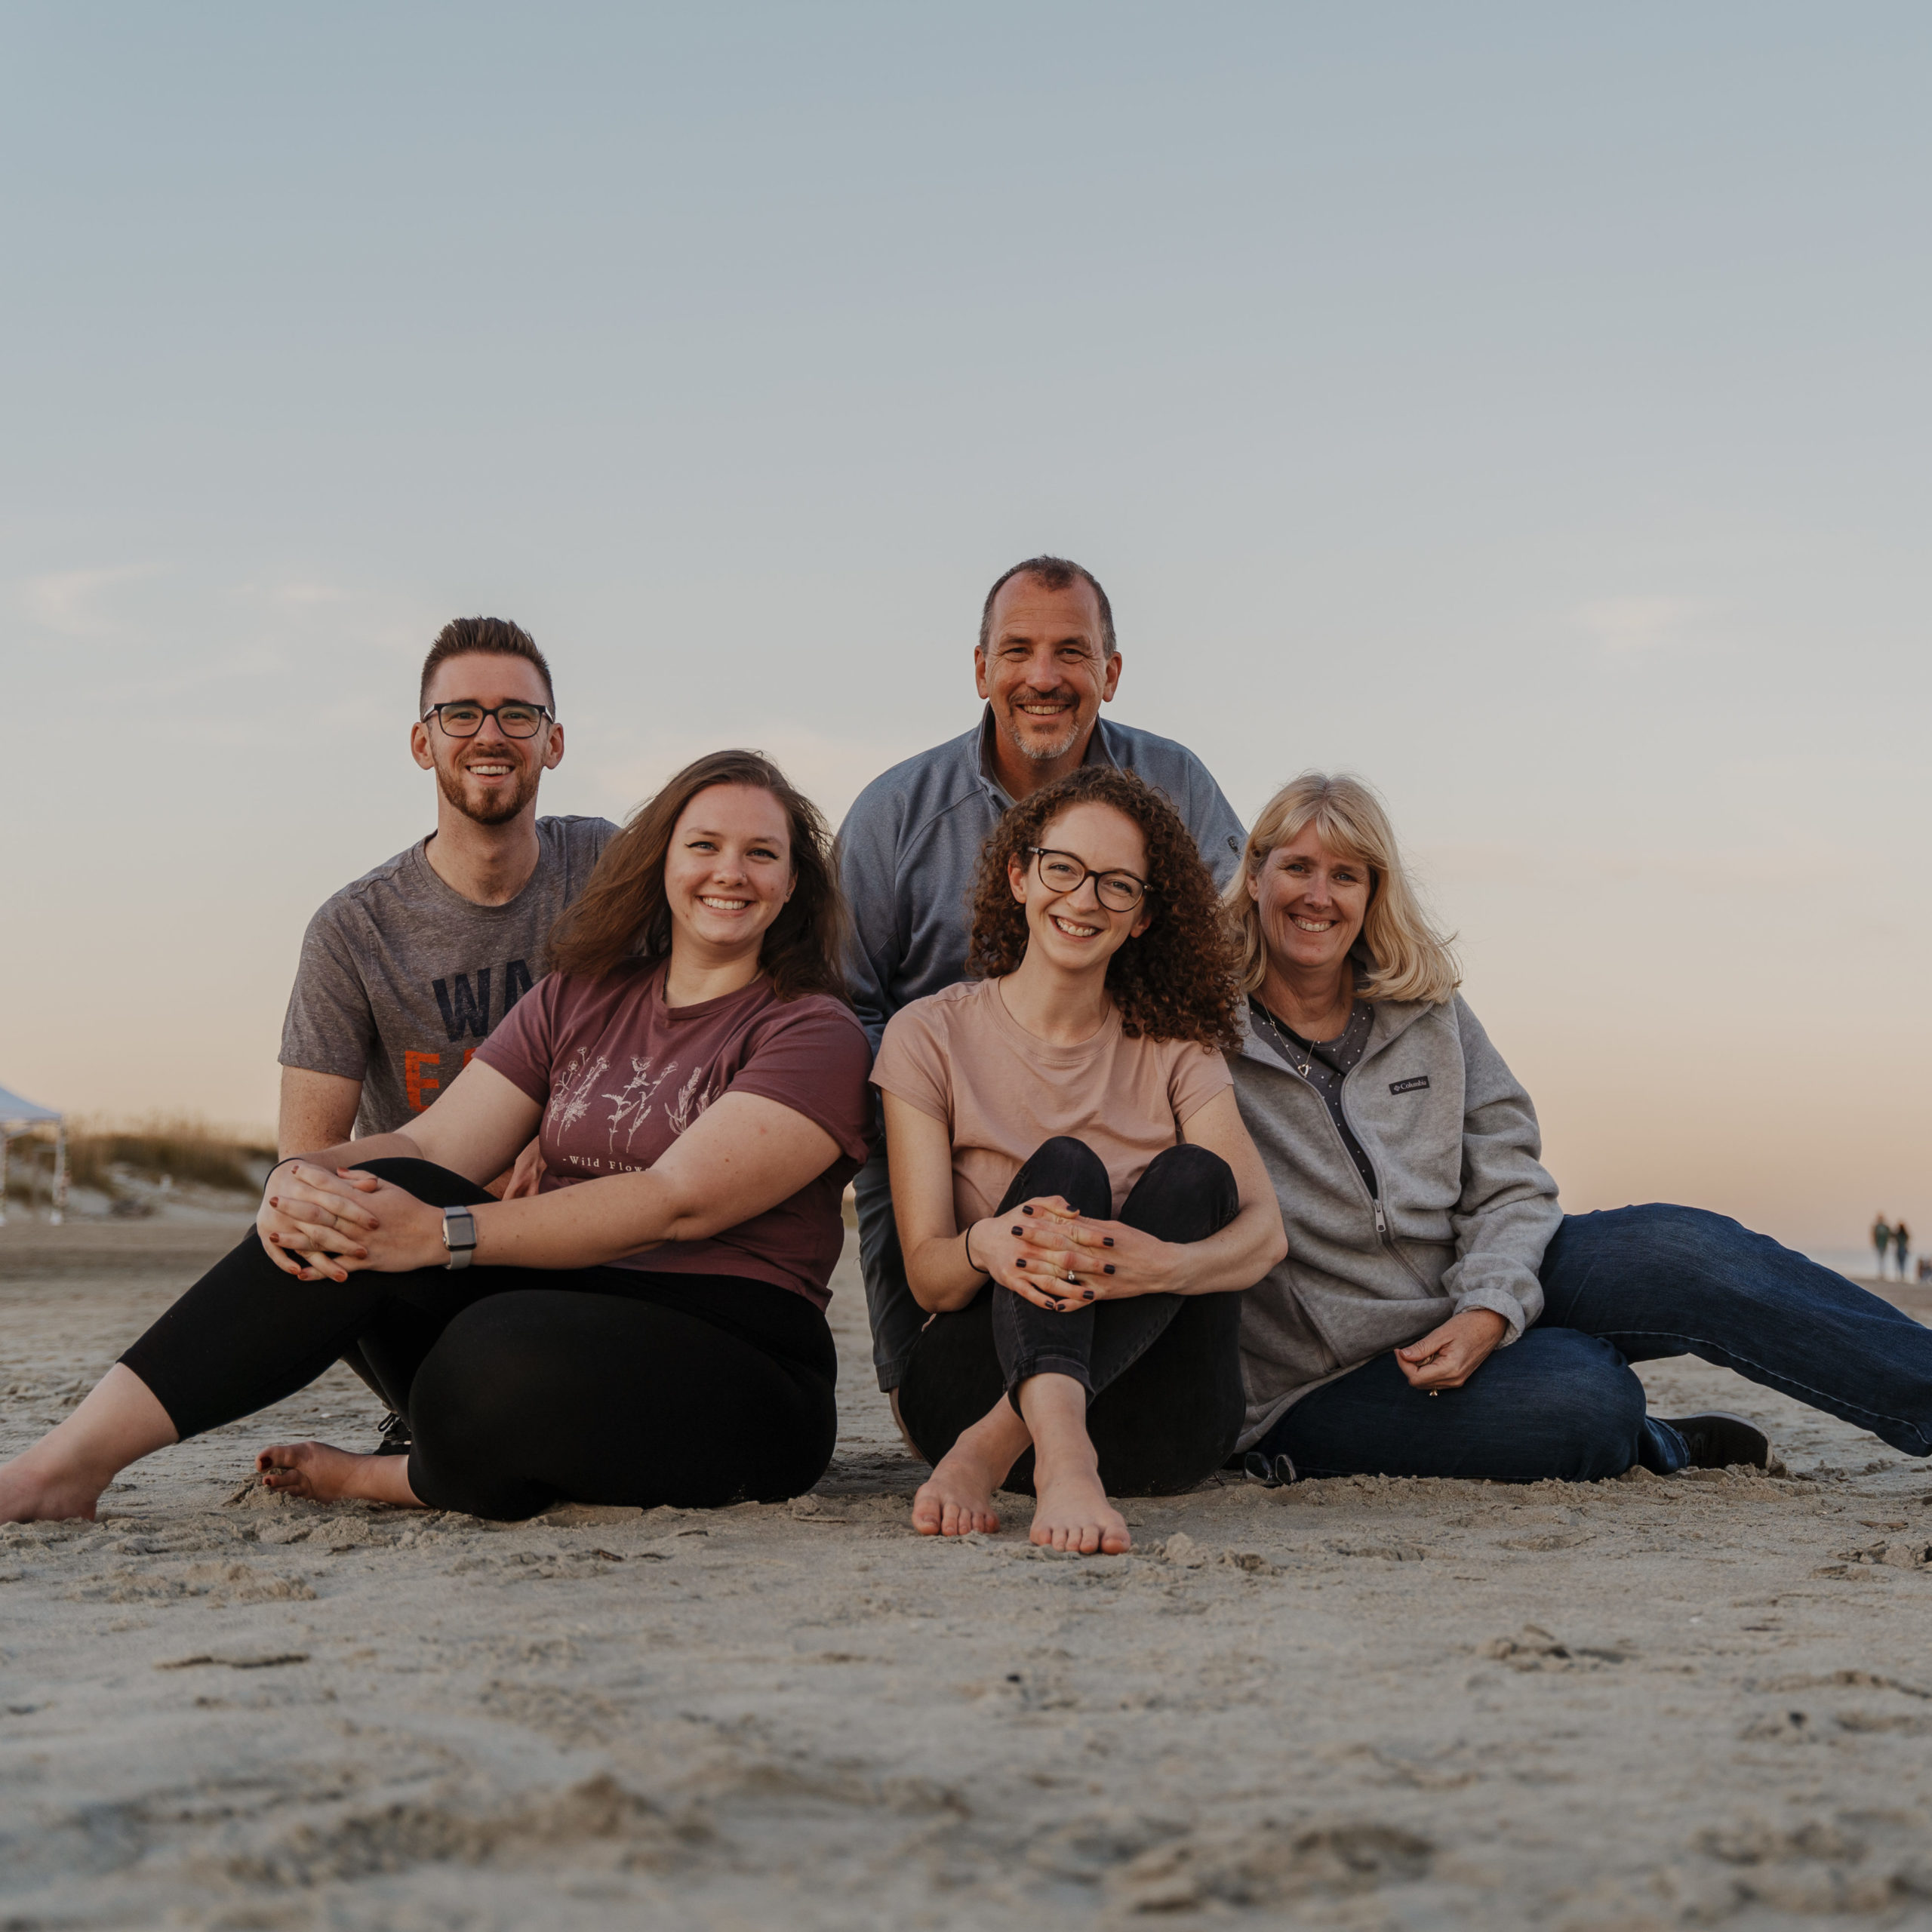 Family of 5 poses for photo on beach